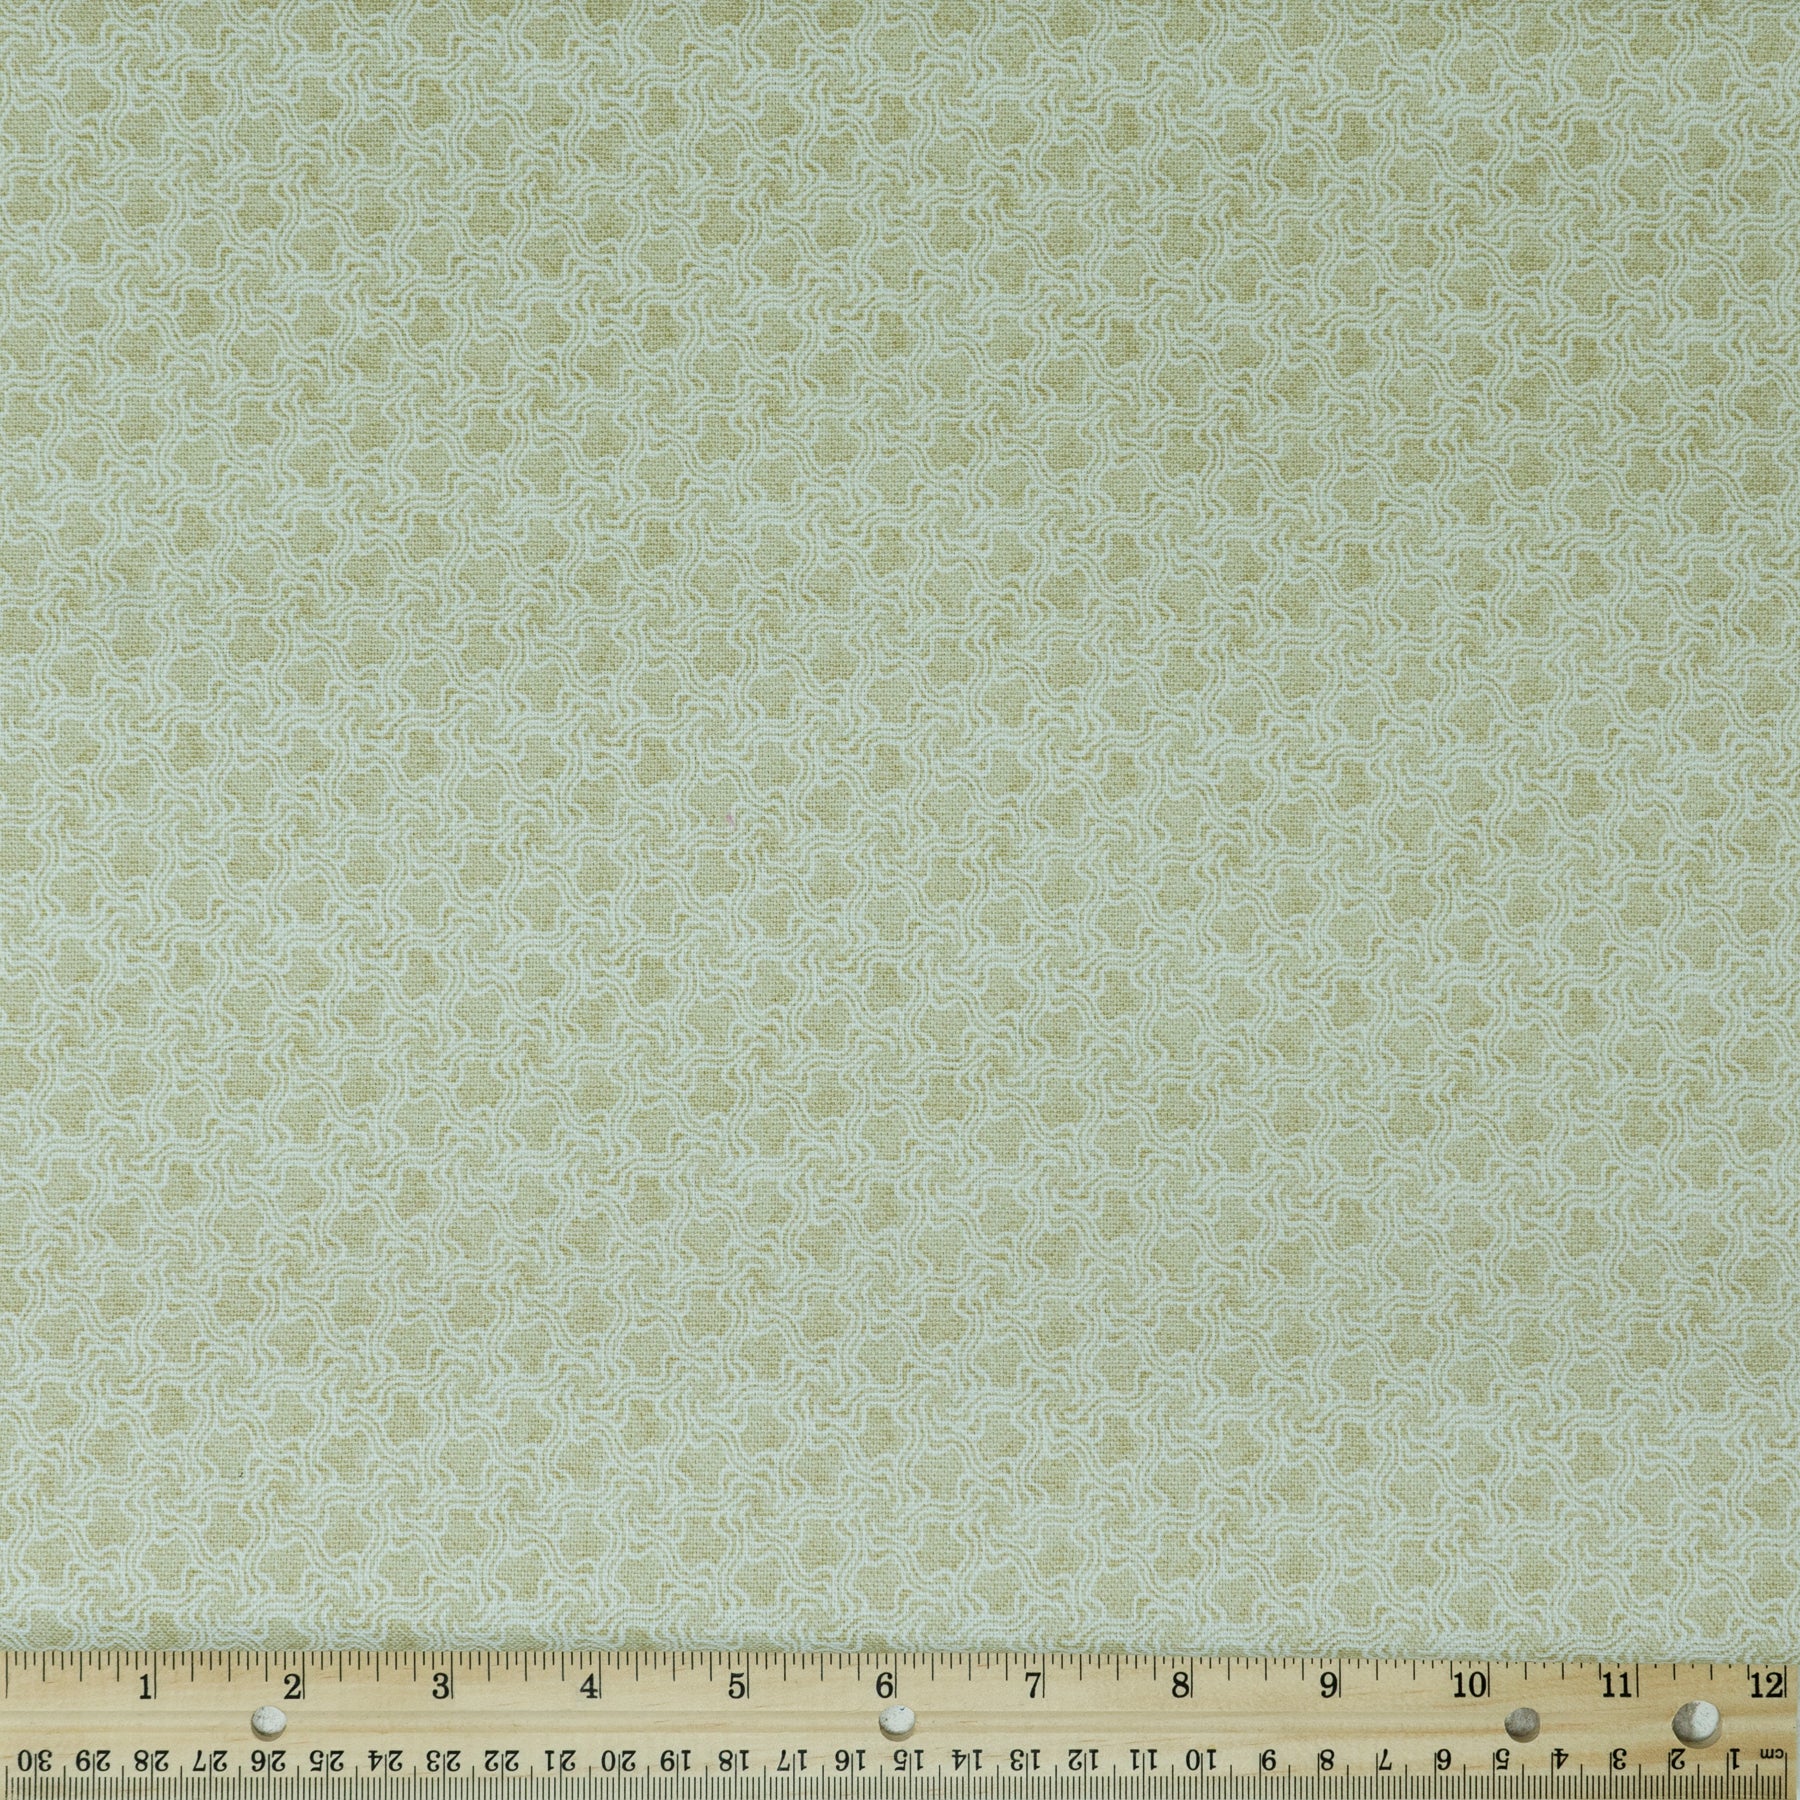 Waverly Inspirations Cotton Duck 54" Whirpool Neutral Color Sewing Fabric by the Yard